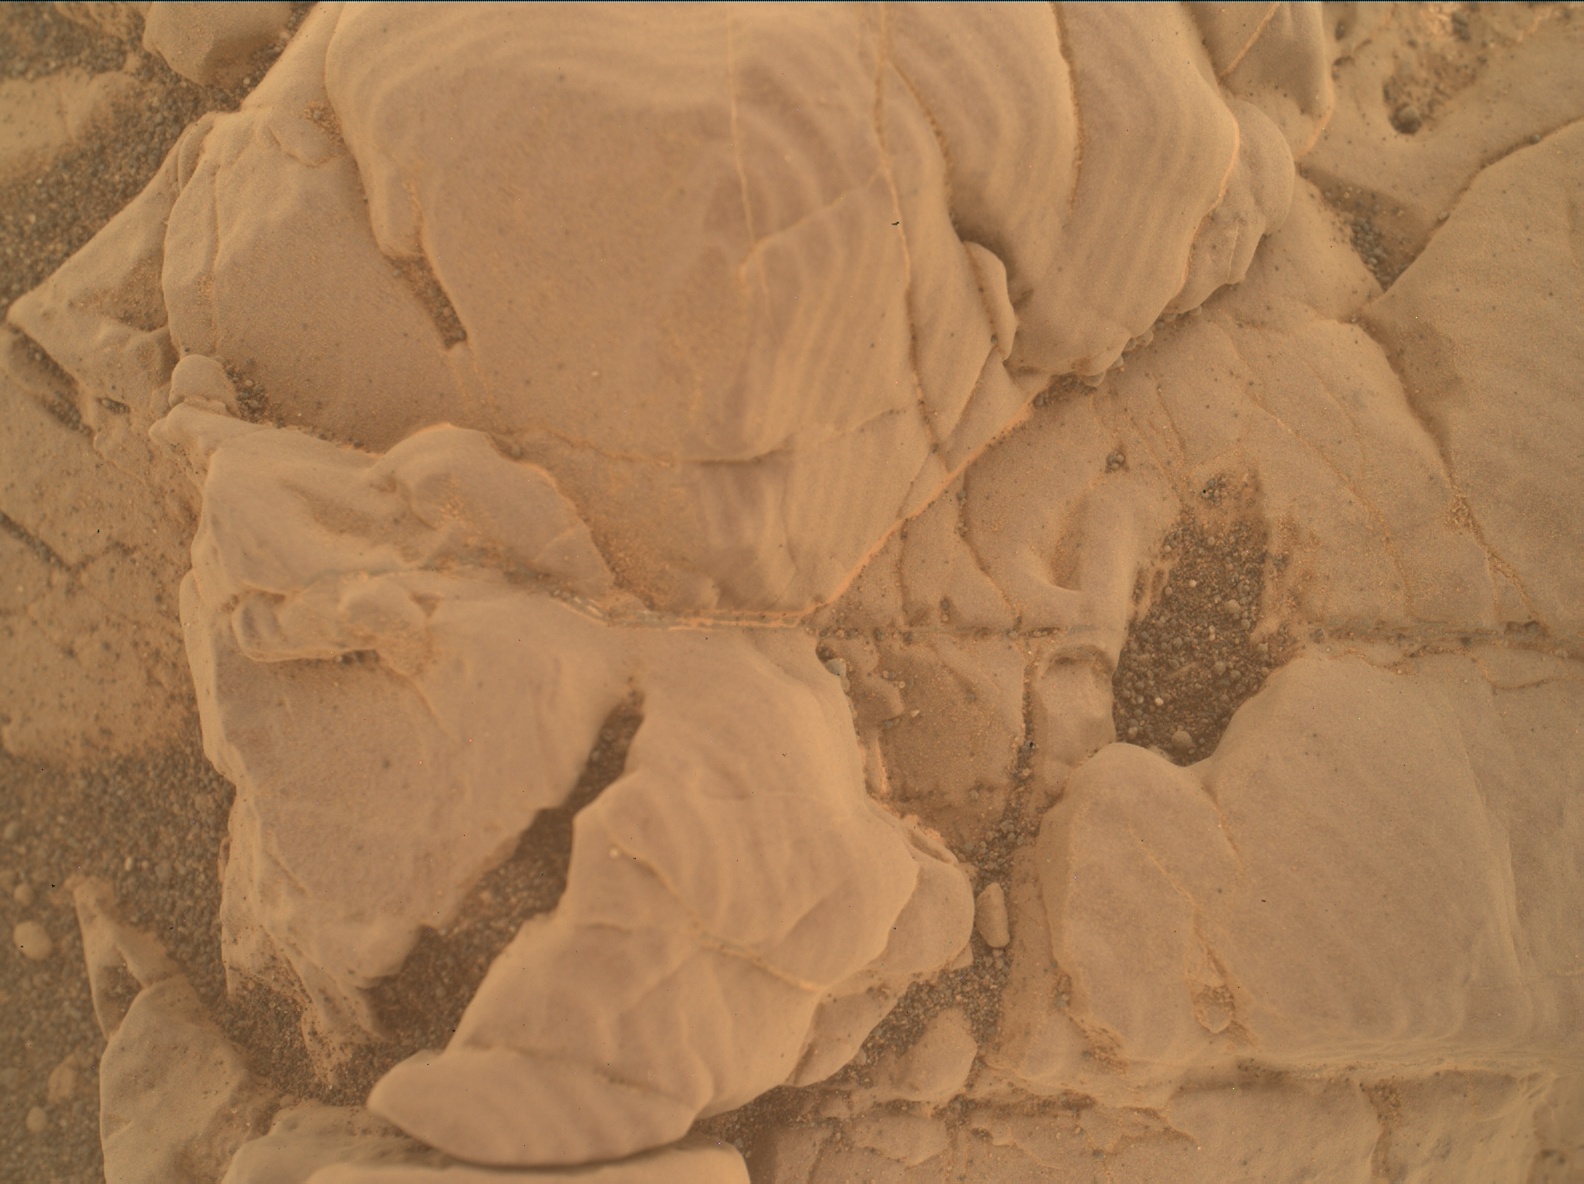 Nasa's Mars rover Curiosity acquired this image using its Mars Hand Lens Imager (MAHLI) on Sol 3076